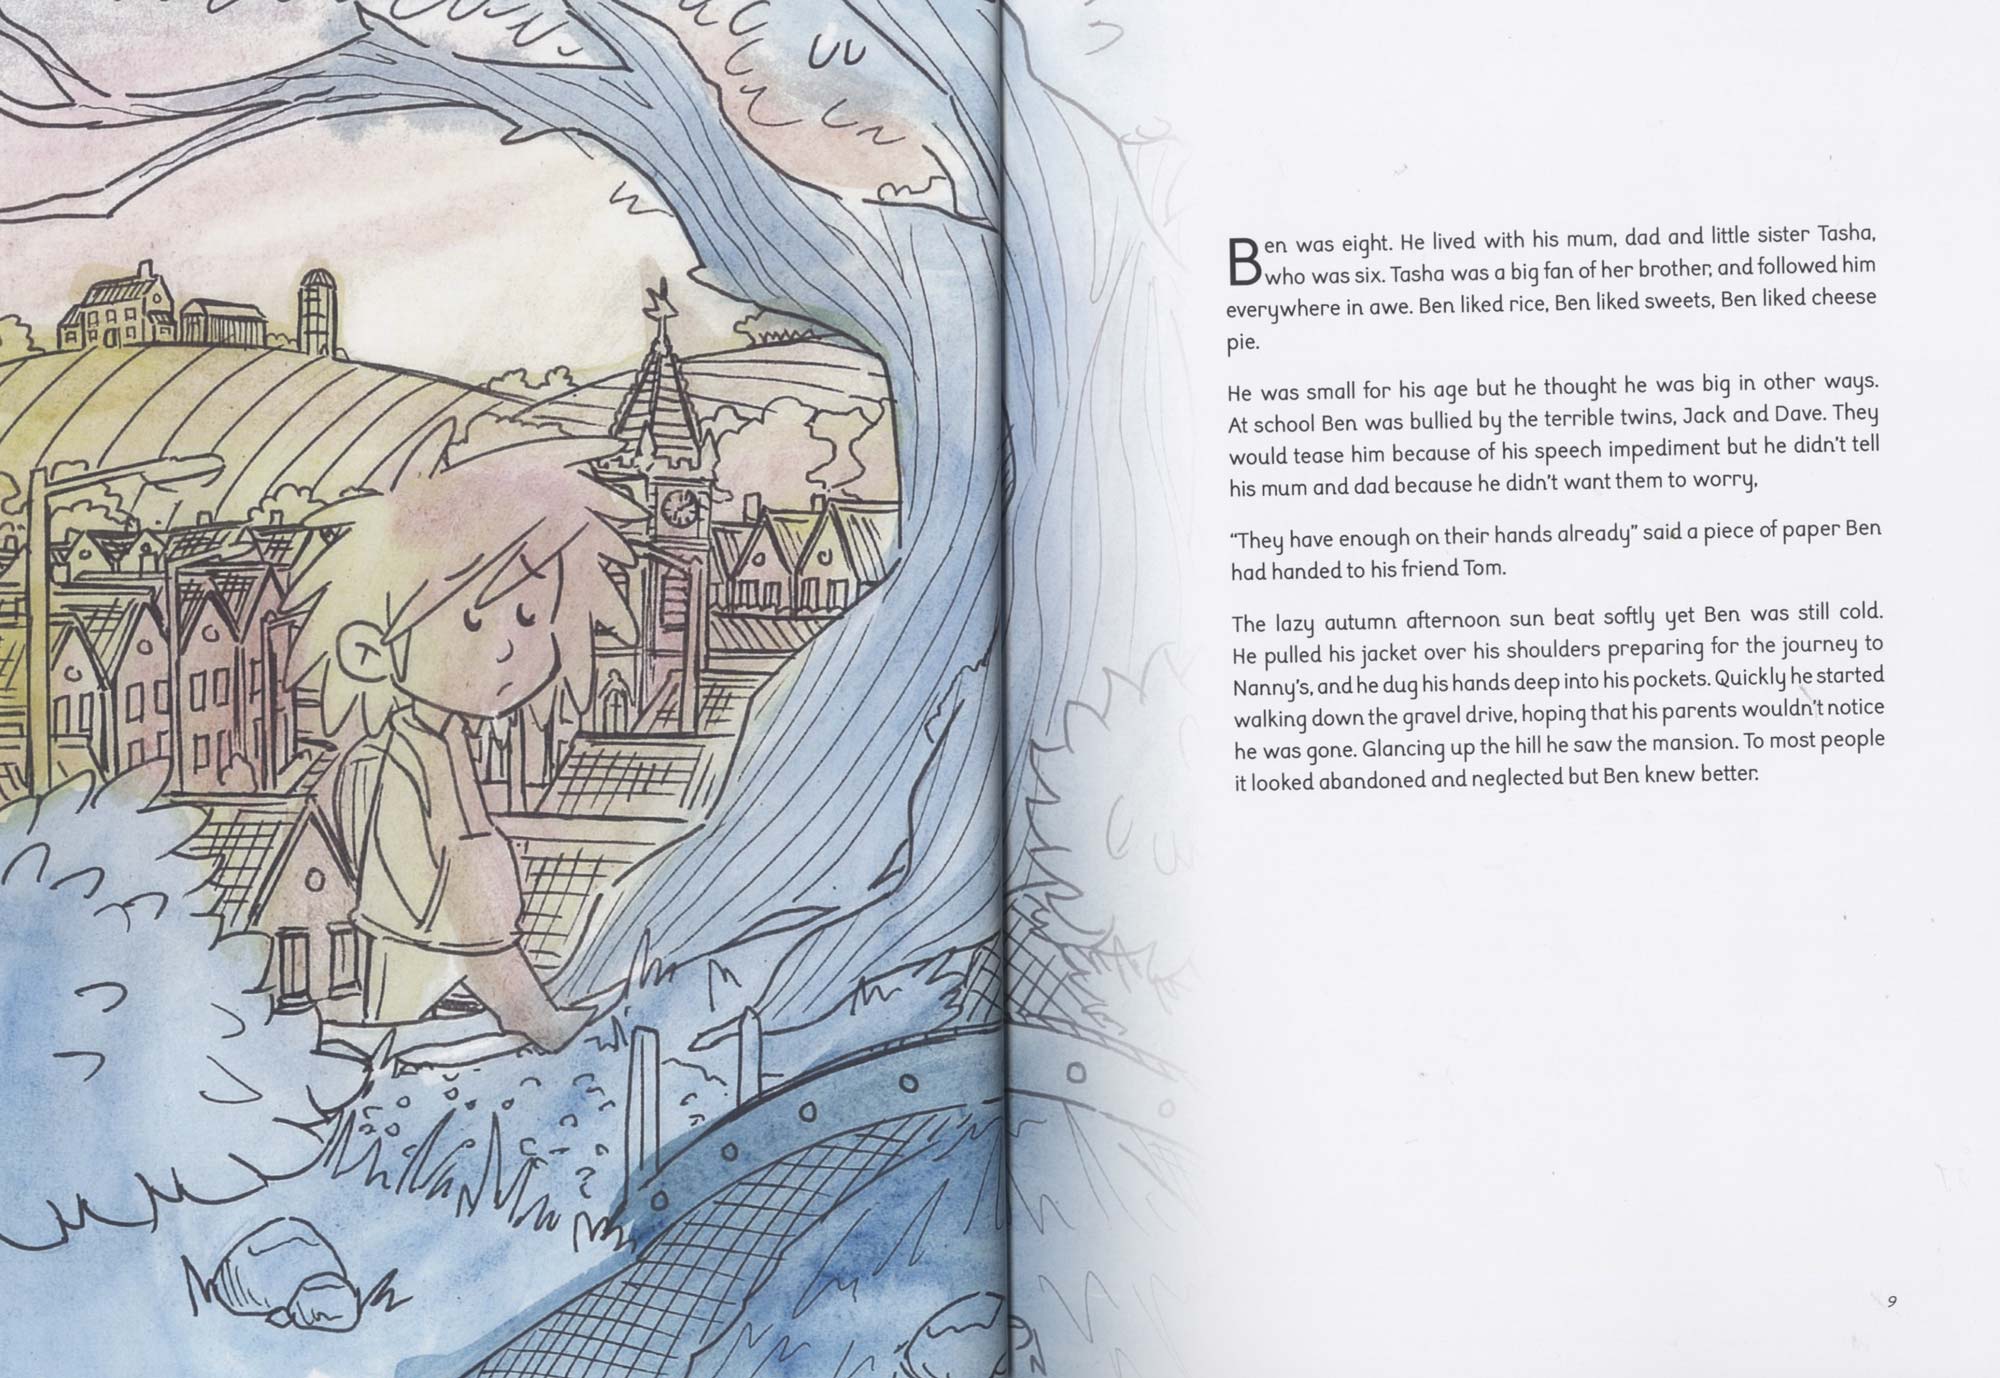 Double page spread, with a black line illustration on the left, then standard black body text on the right page